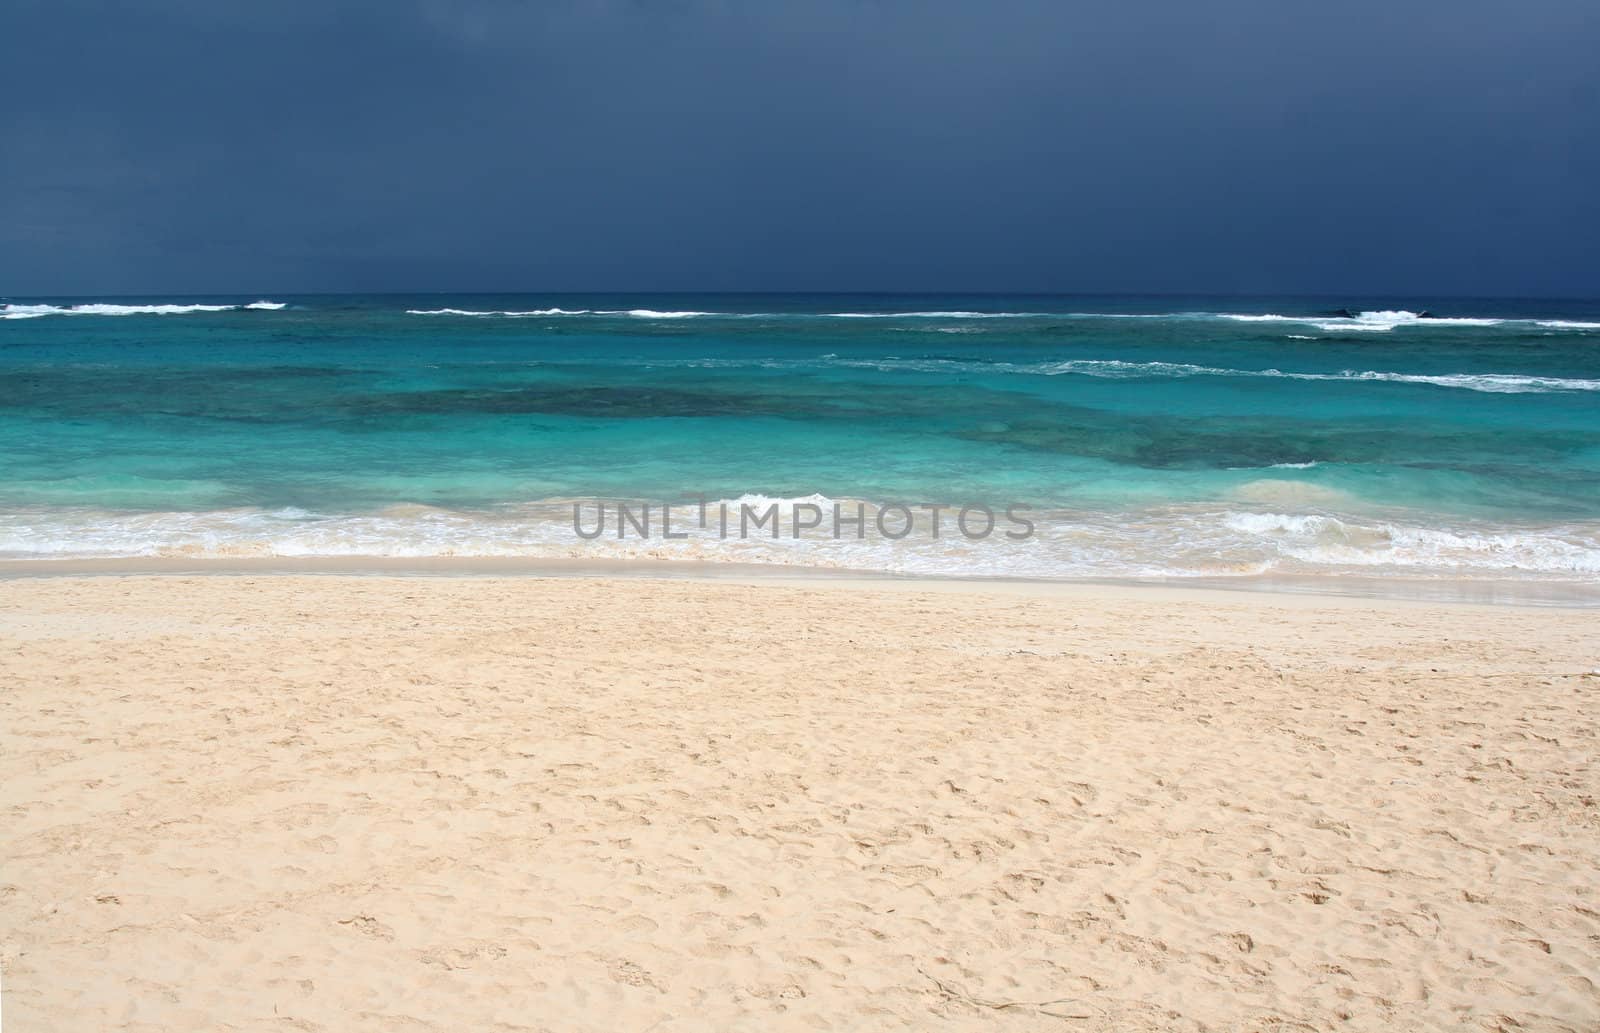 The tropical beach of Punta Cana, Dominican Republic.  Shot on an overcast day.